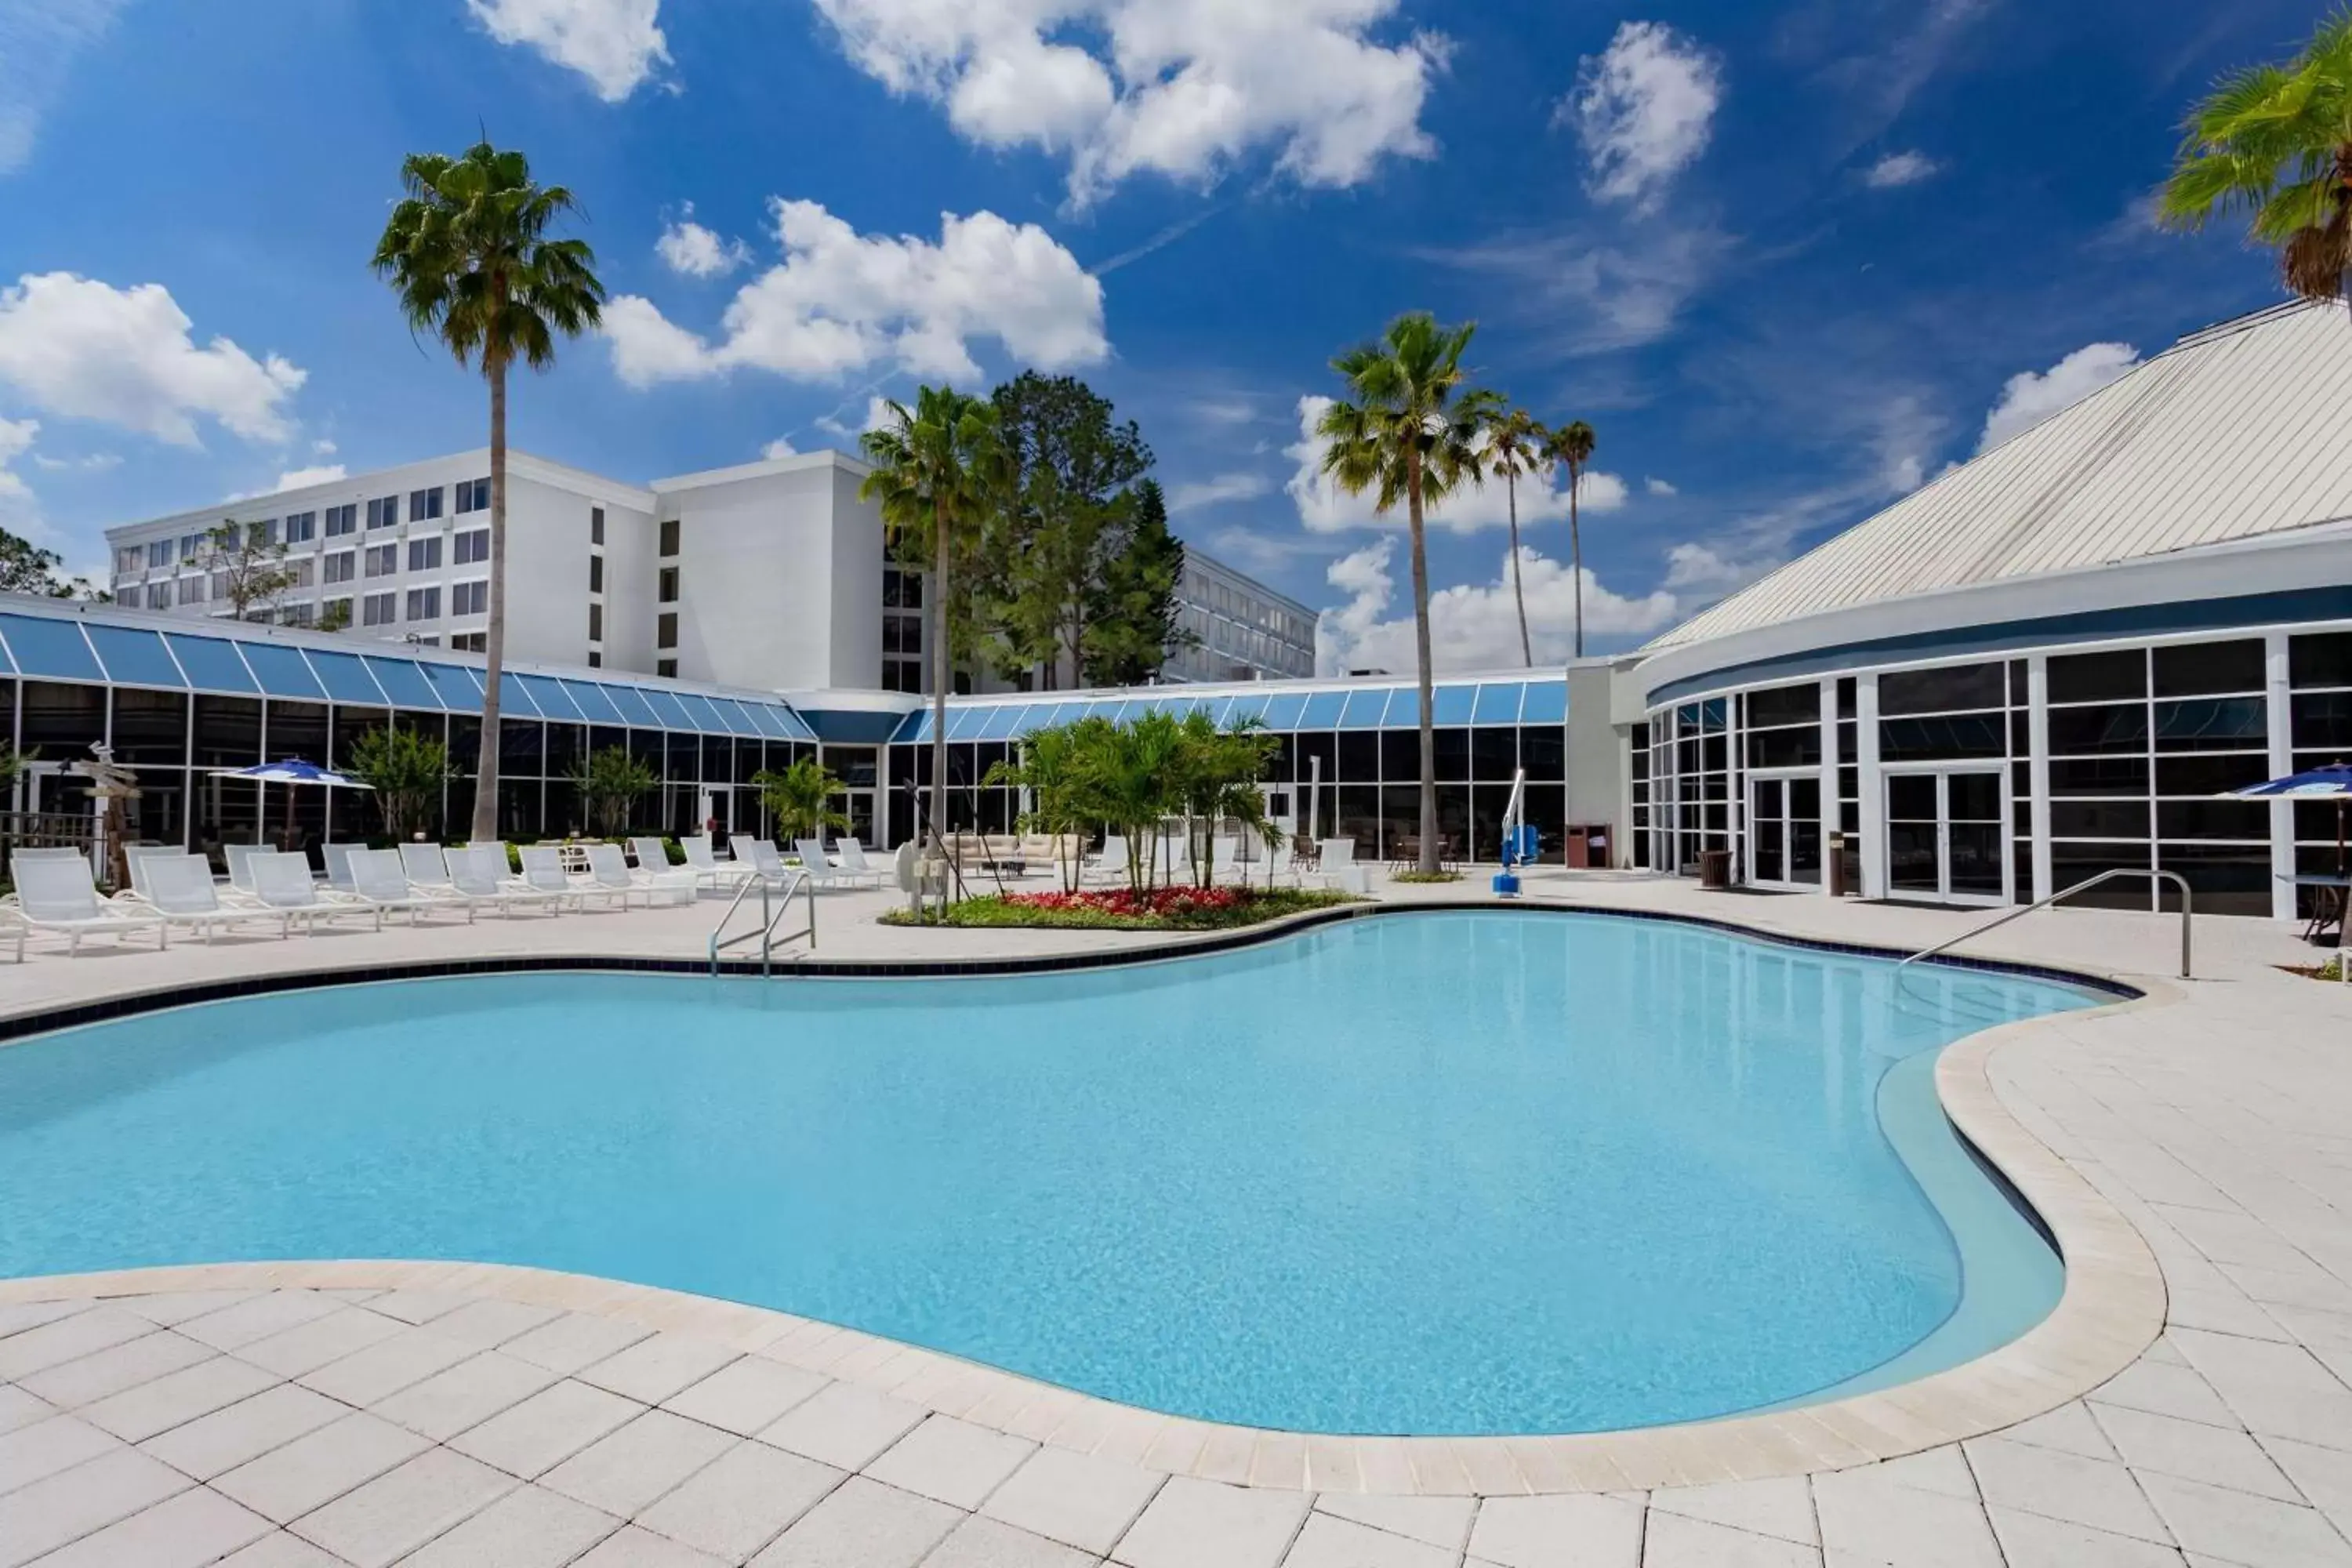 Activities, Swimming Pool in Wyndham Orlando Resort & Conference Center, Celebration Area